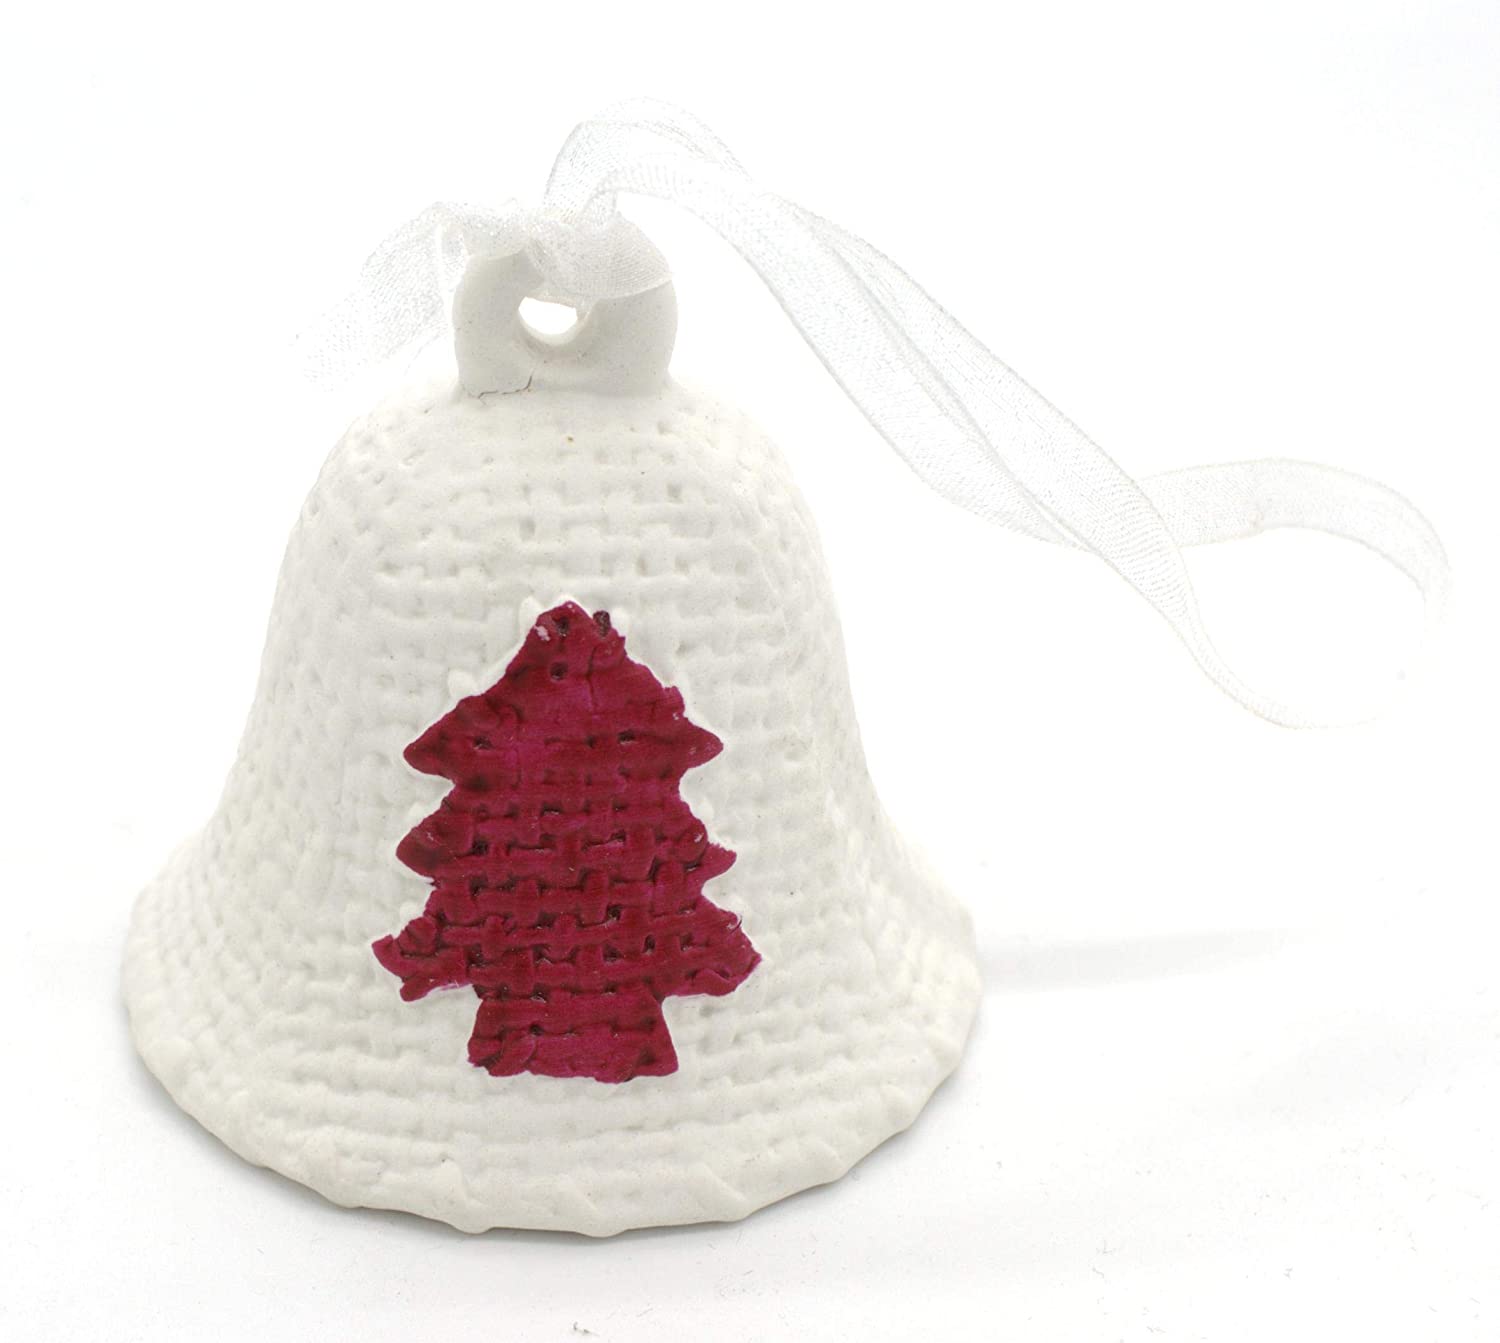 Daro Decorative Ceramic Bell With Tree – Two Different Sizes S Diameter 5 C